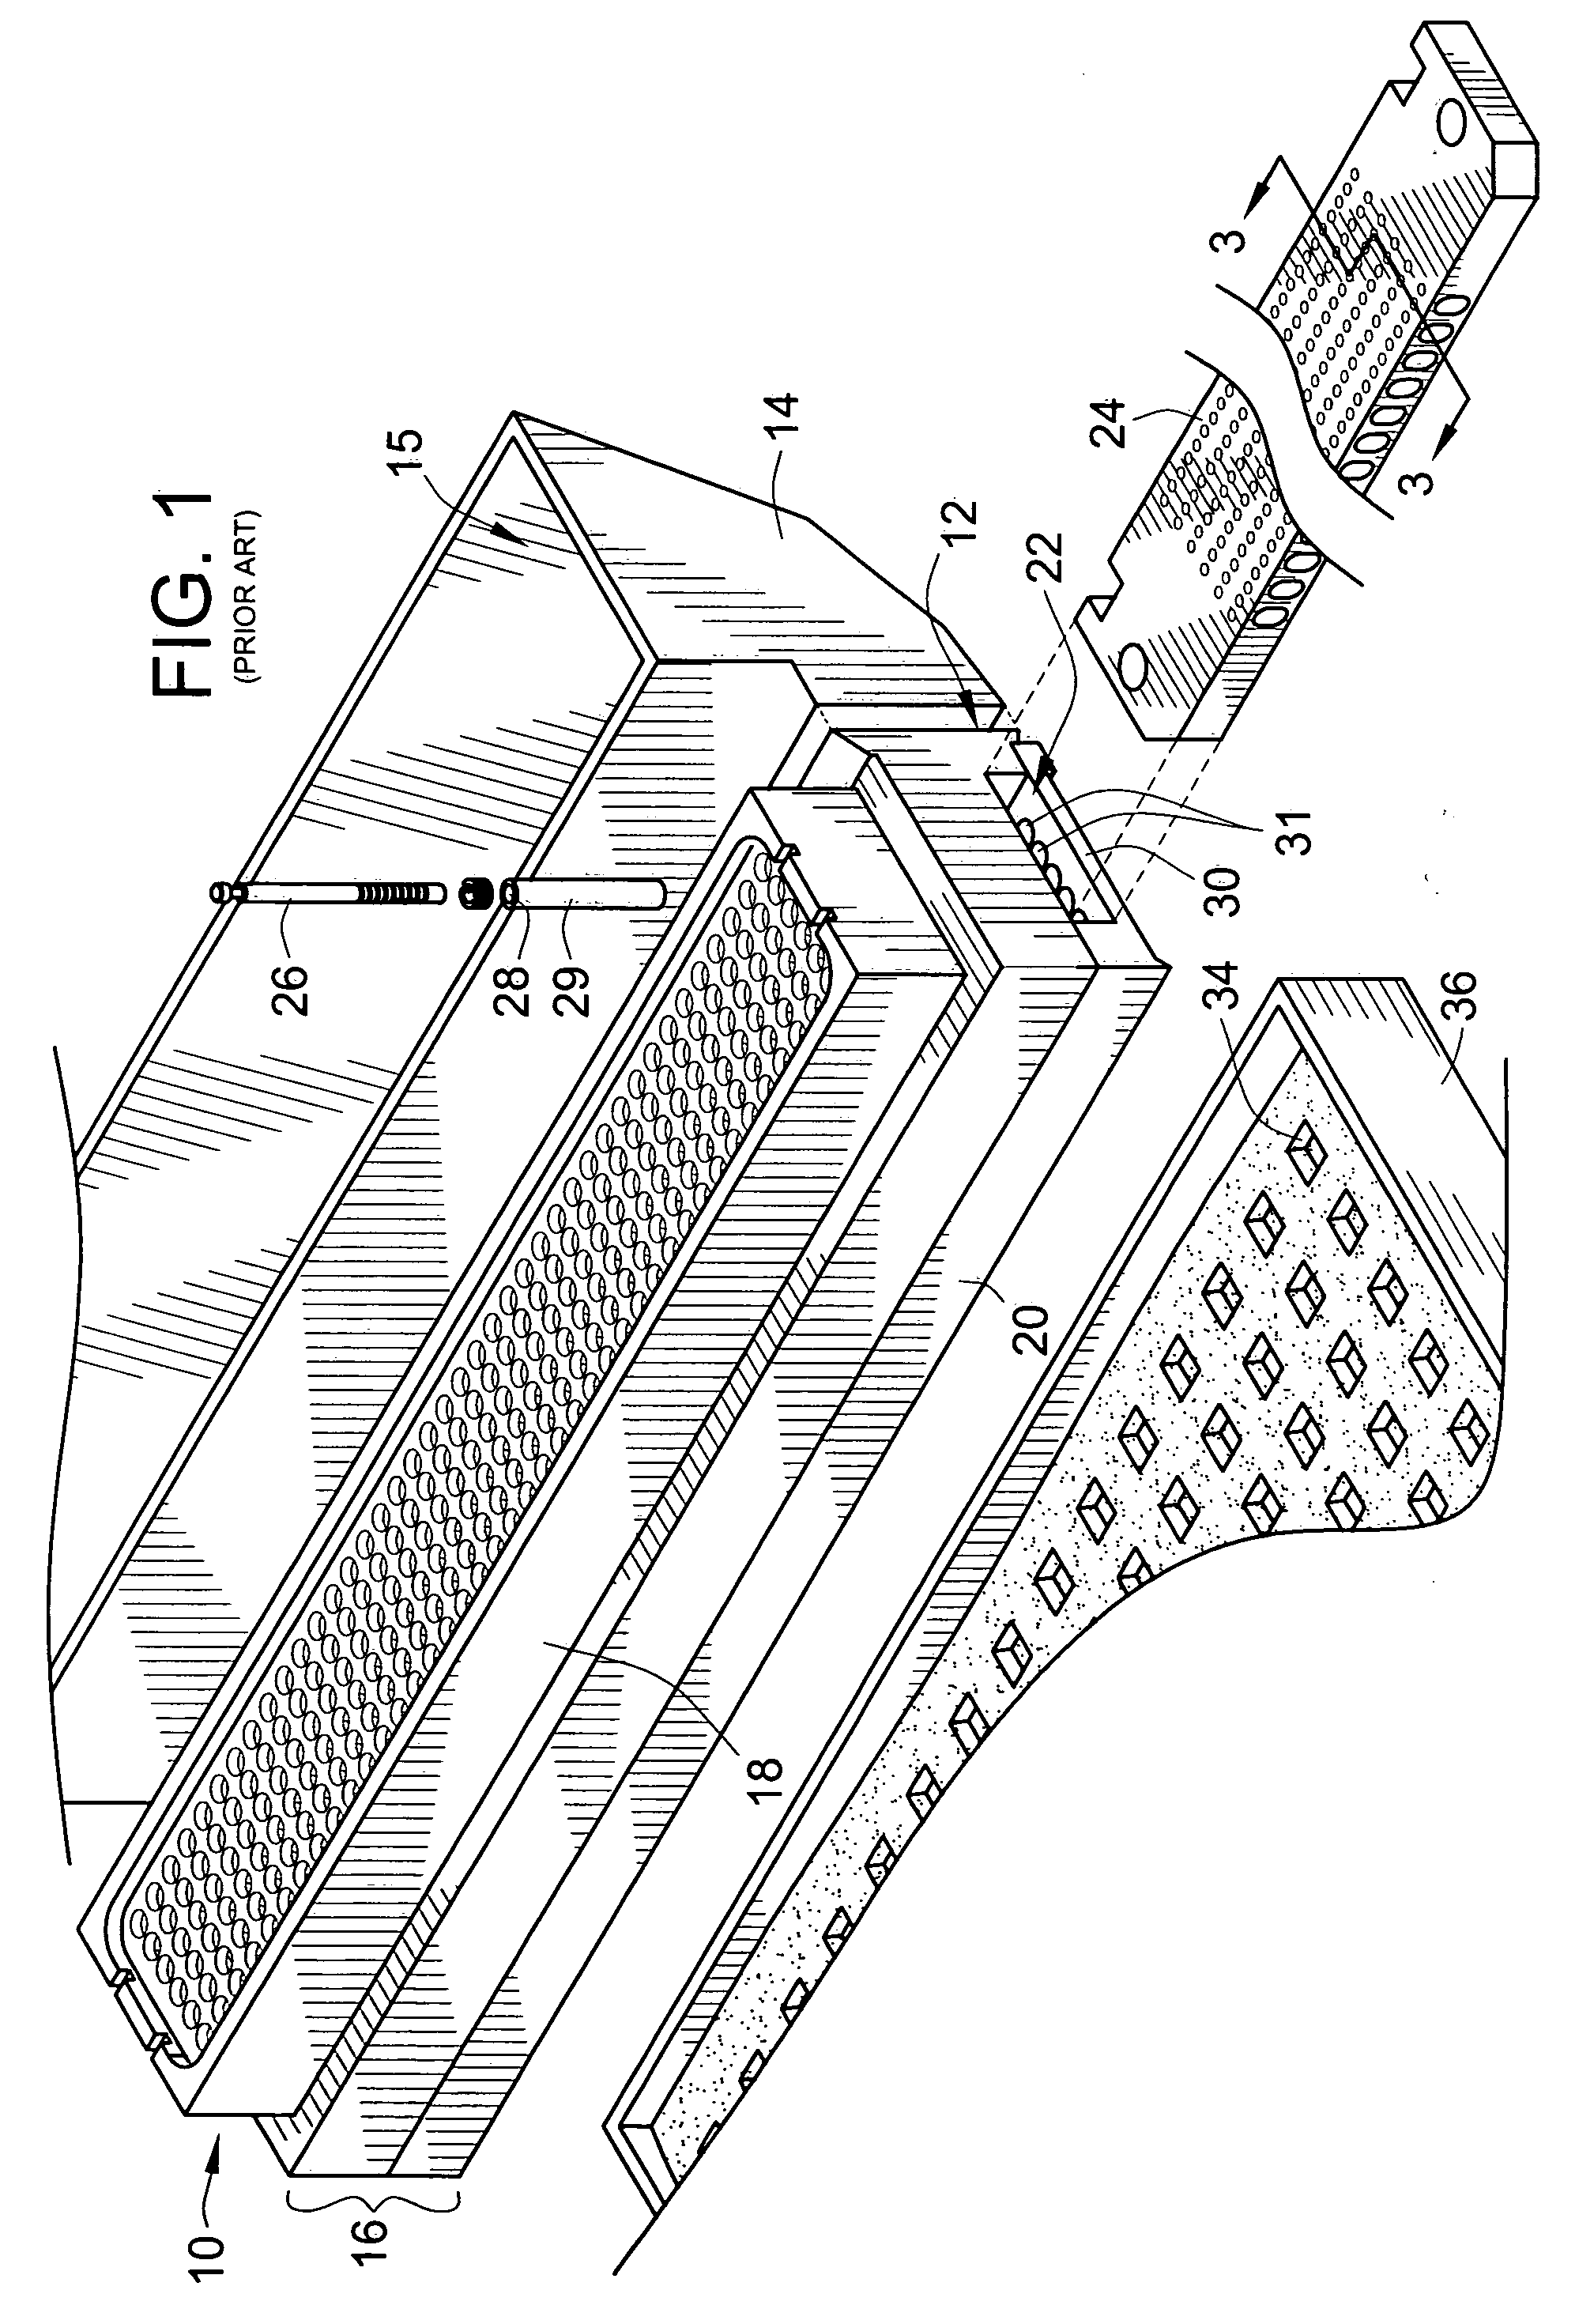 Depositor pump, having a modular valve apparatus, for manufacturing starch molded products such as candy